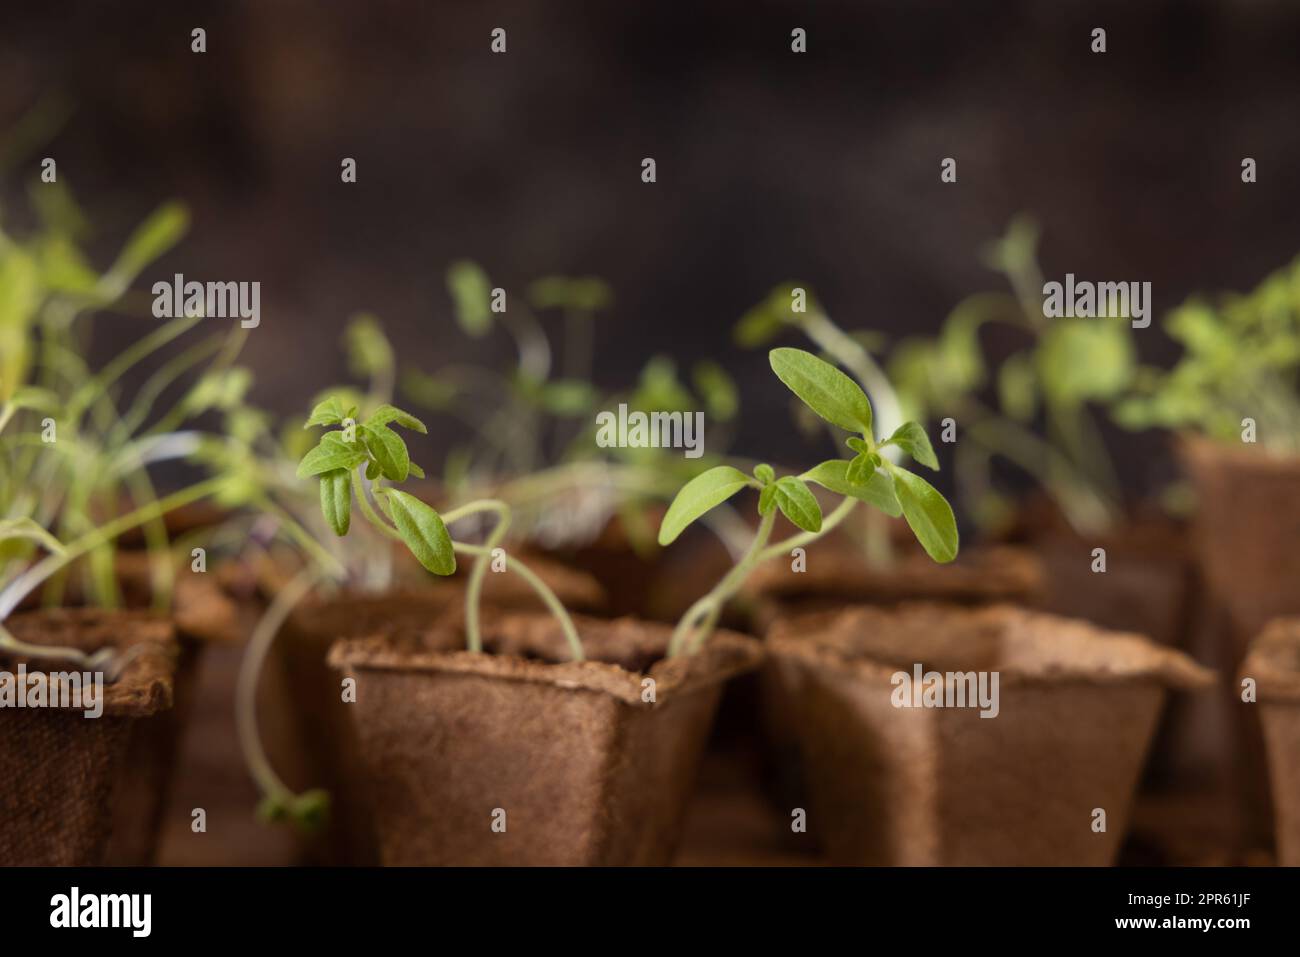 Vegetable seedlings in biodegradable pots on wooden table close up. Urban gardening Stock Photo